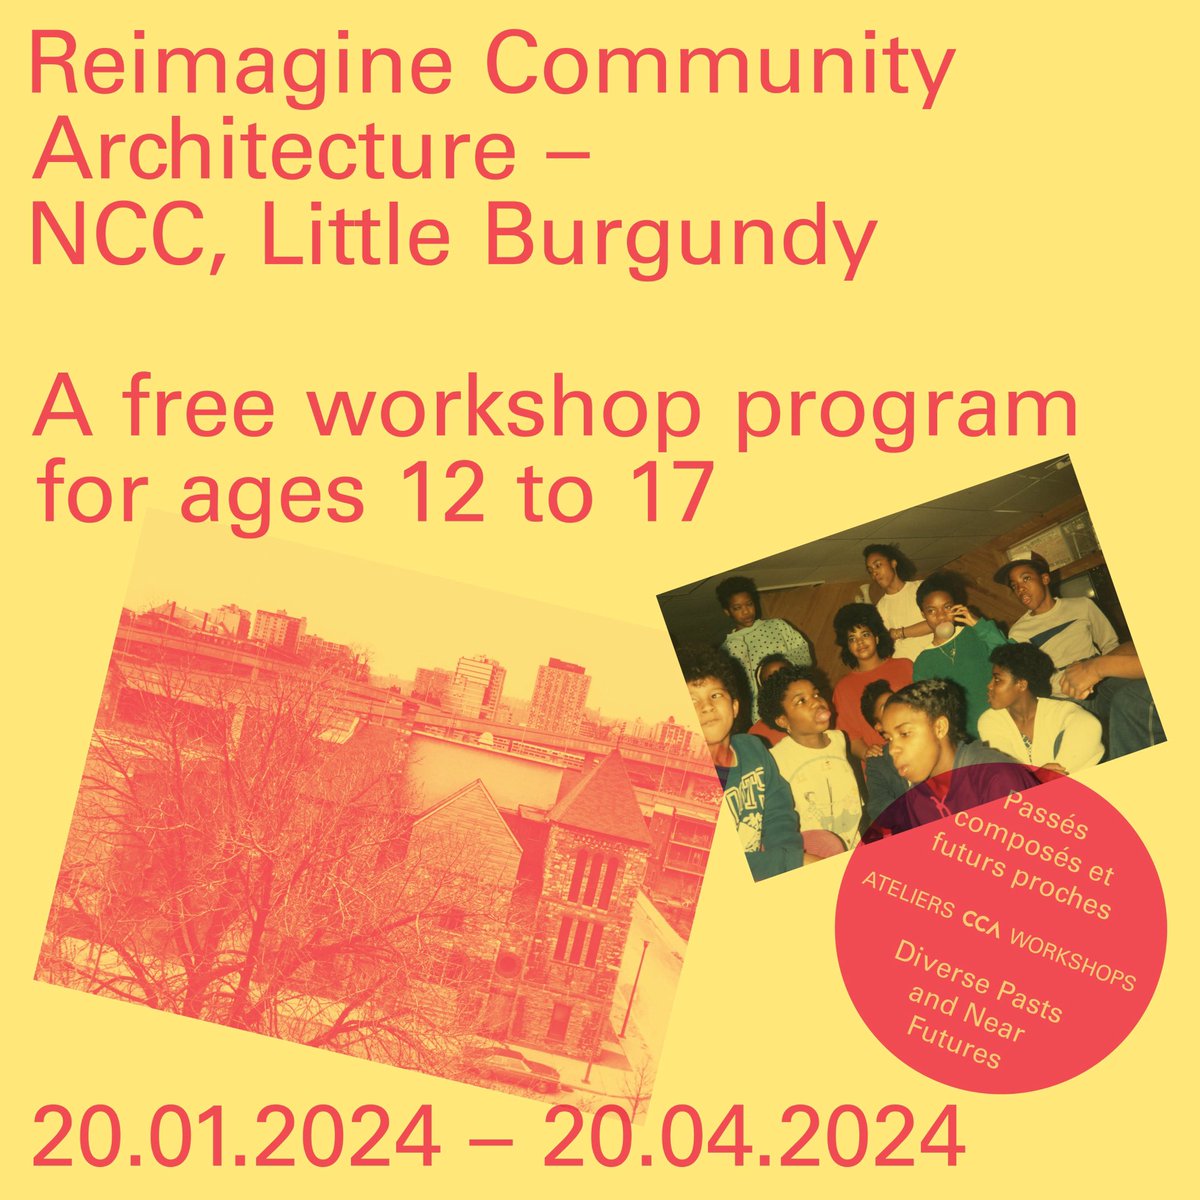 Register by 15 January to 'Diverse Pasts and Near Futures,' a 10-week workshop series at the CCA, inviting youth to contemplate and shape the future of a new community space in Little Burgundy. More details: cca.qc.ca/en/events/9291…